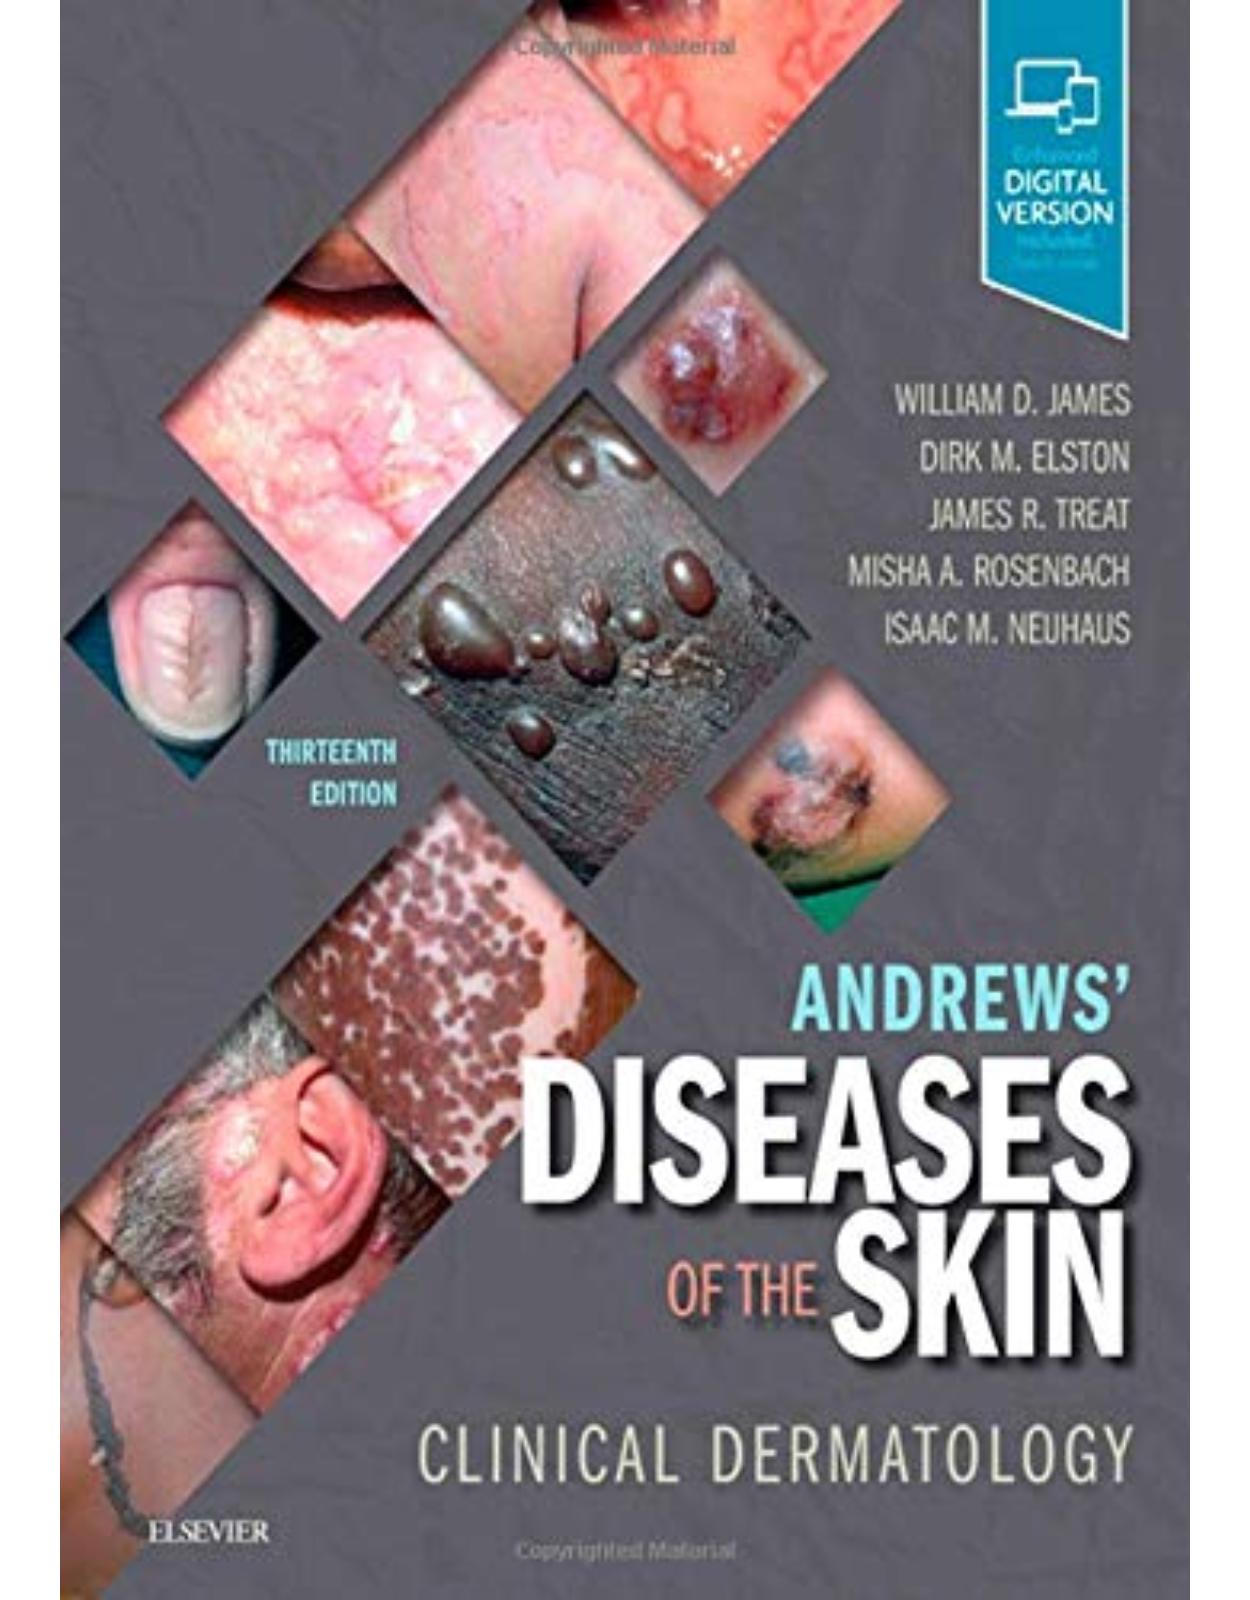 Andrews’ Diseases of the Skin: Clinical Dermatology, 13e